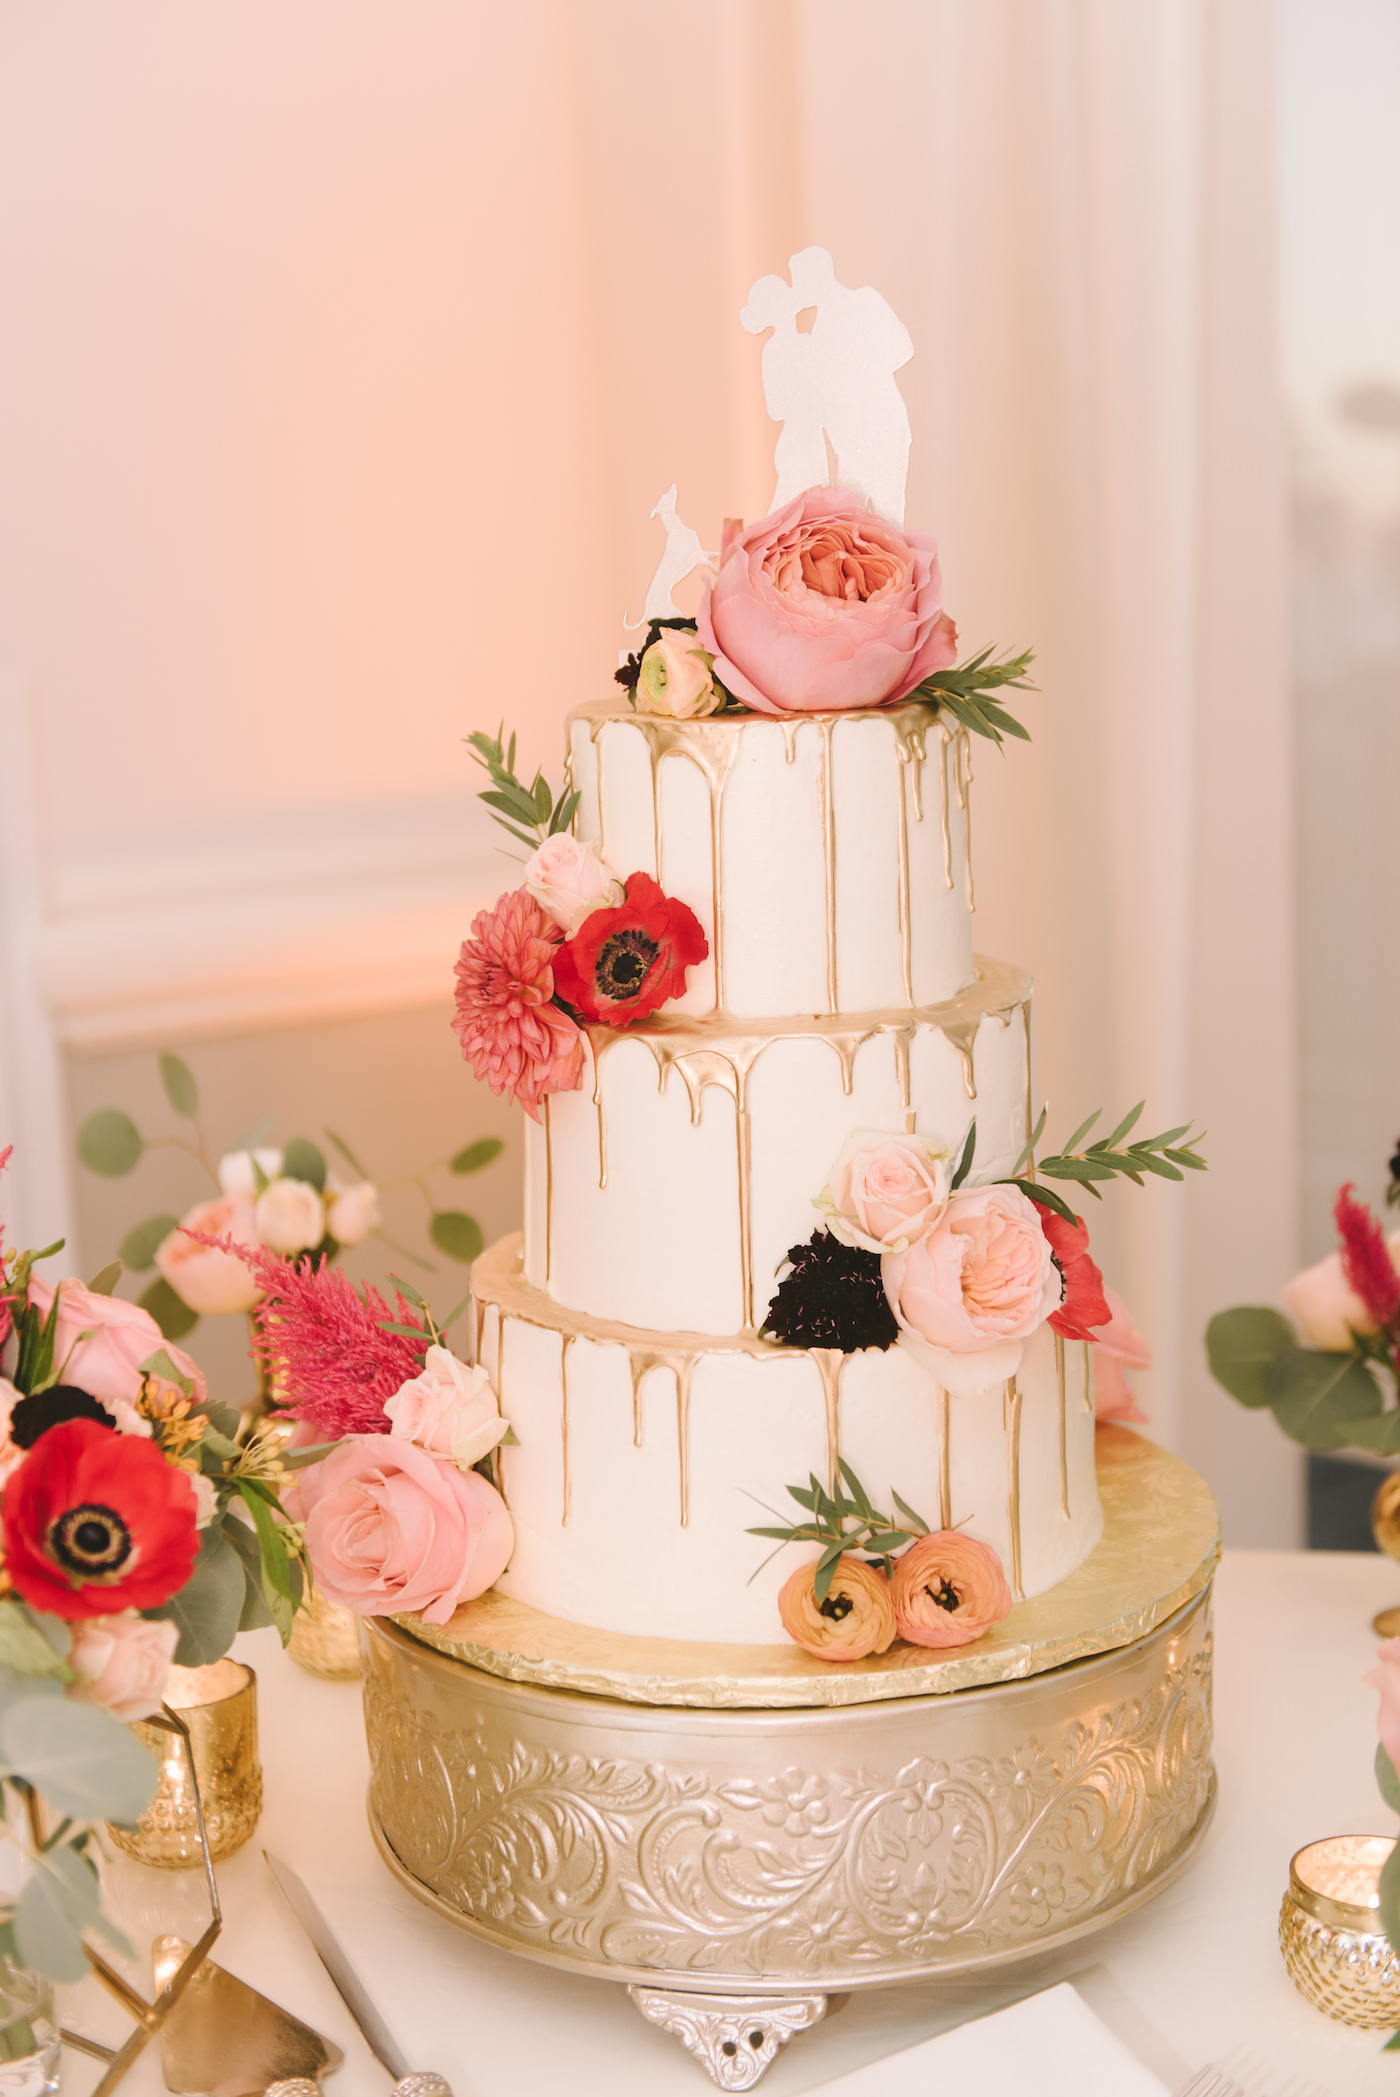 Three Tier Wedding Cake with Dripping Gold Icing and Bright Colorful Fresh Flowers and Custom Silhouette Bride and Groom with Dog Cake Toppers on Round Ornate Gold Cake Stake